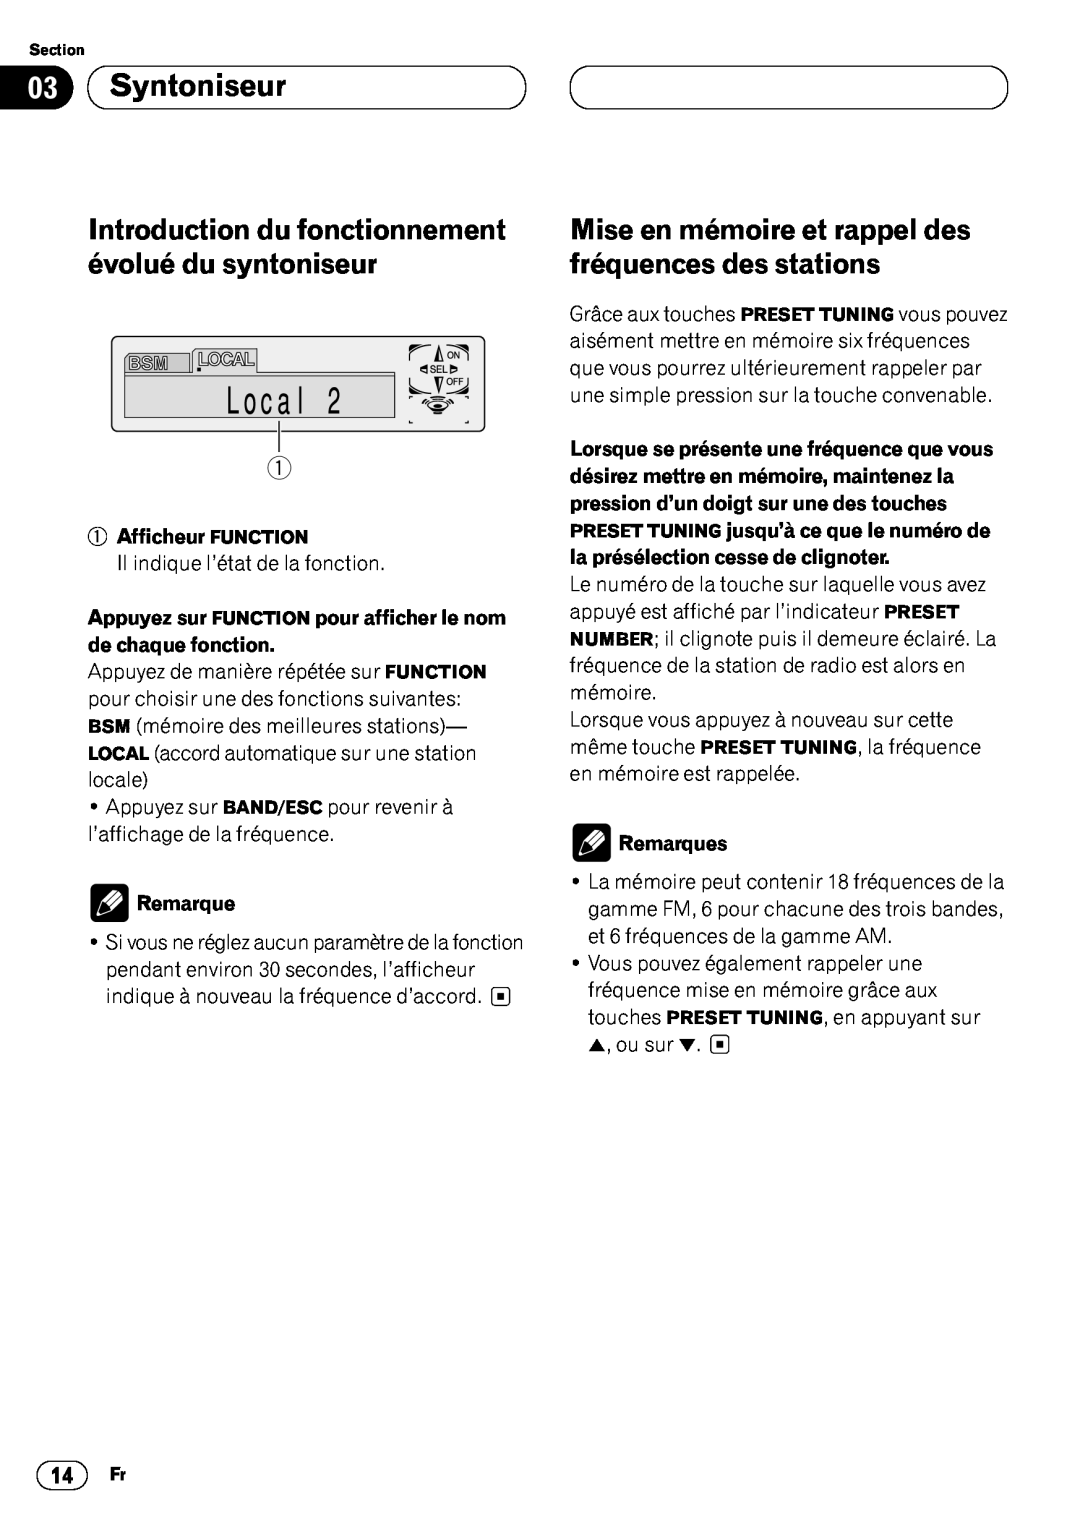 Pioneer DEH-P6400 operation manual 03Syntoniseur, 1Afficheur FUNCTION, Remarques 